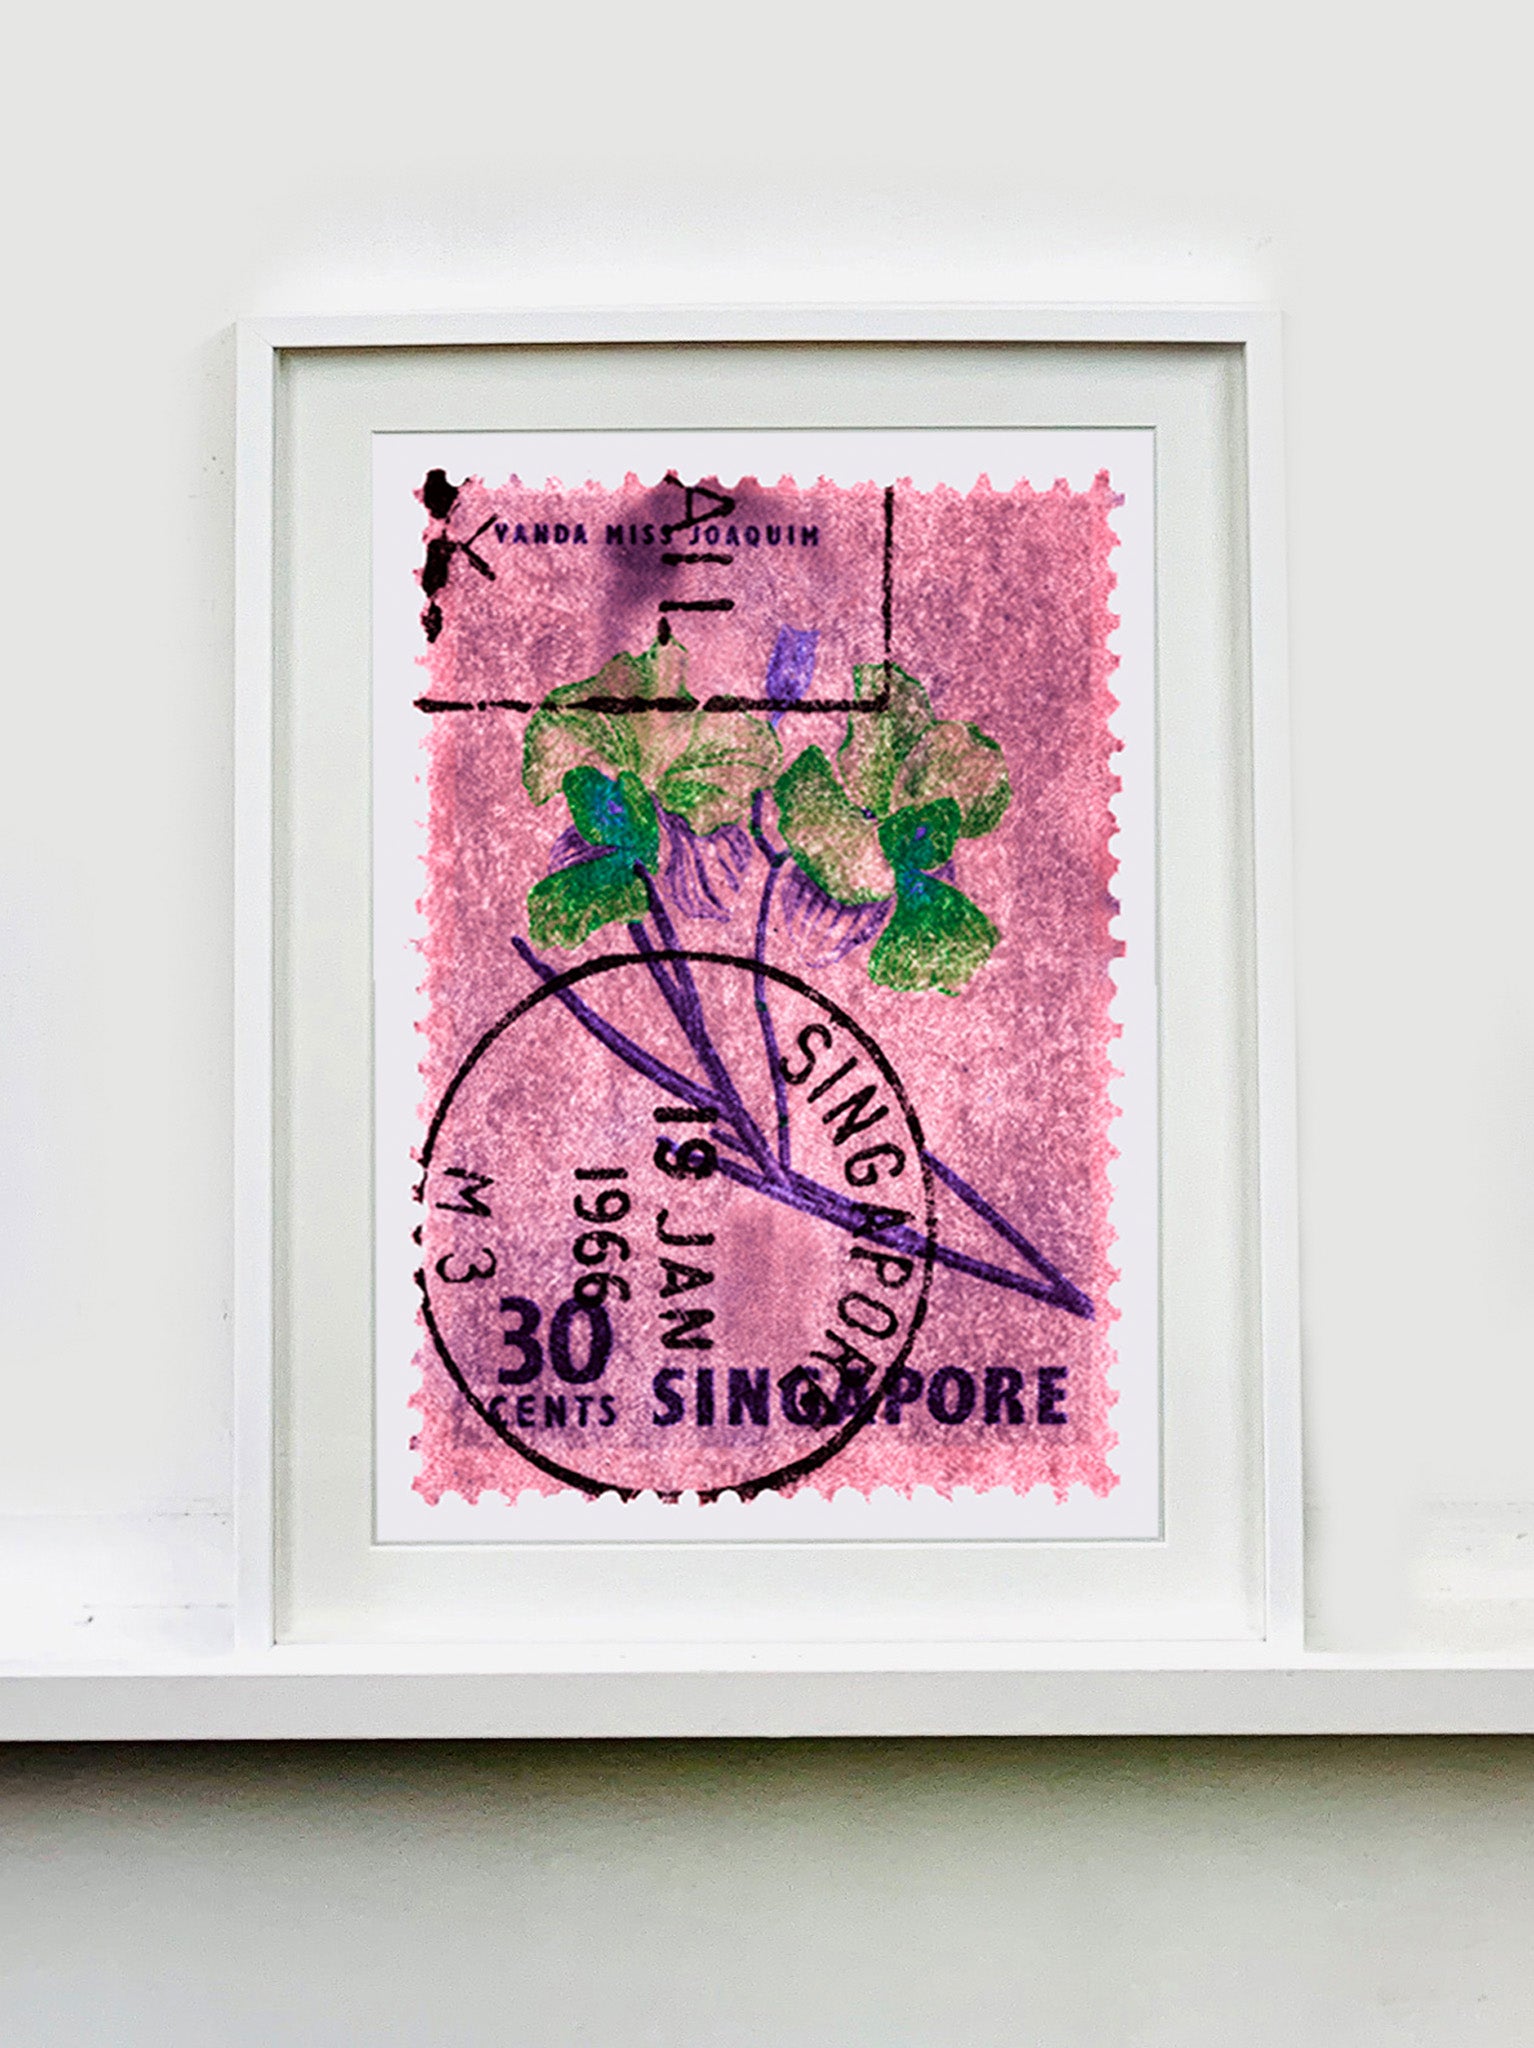 Singapore Stamp Collection '30 Cents Singapore Orchid Pink'. These historic postage stamps that make up the Heidler & Heeps Stamp Collection, Singapore Series 'Postcards from Afar' have been given a twenty-first century pop art lease of life. The fine detailed tapestry of the original small postage stamp has been brought to life, made unique by the franking stamp and Heidler & Heeps specialist darkroom process.